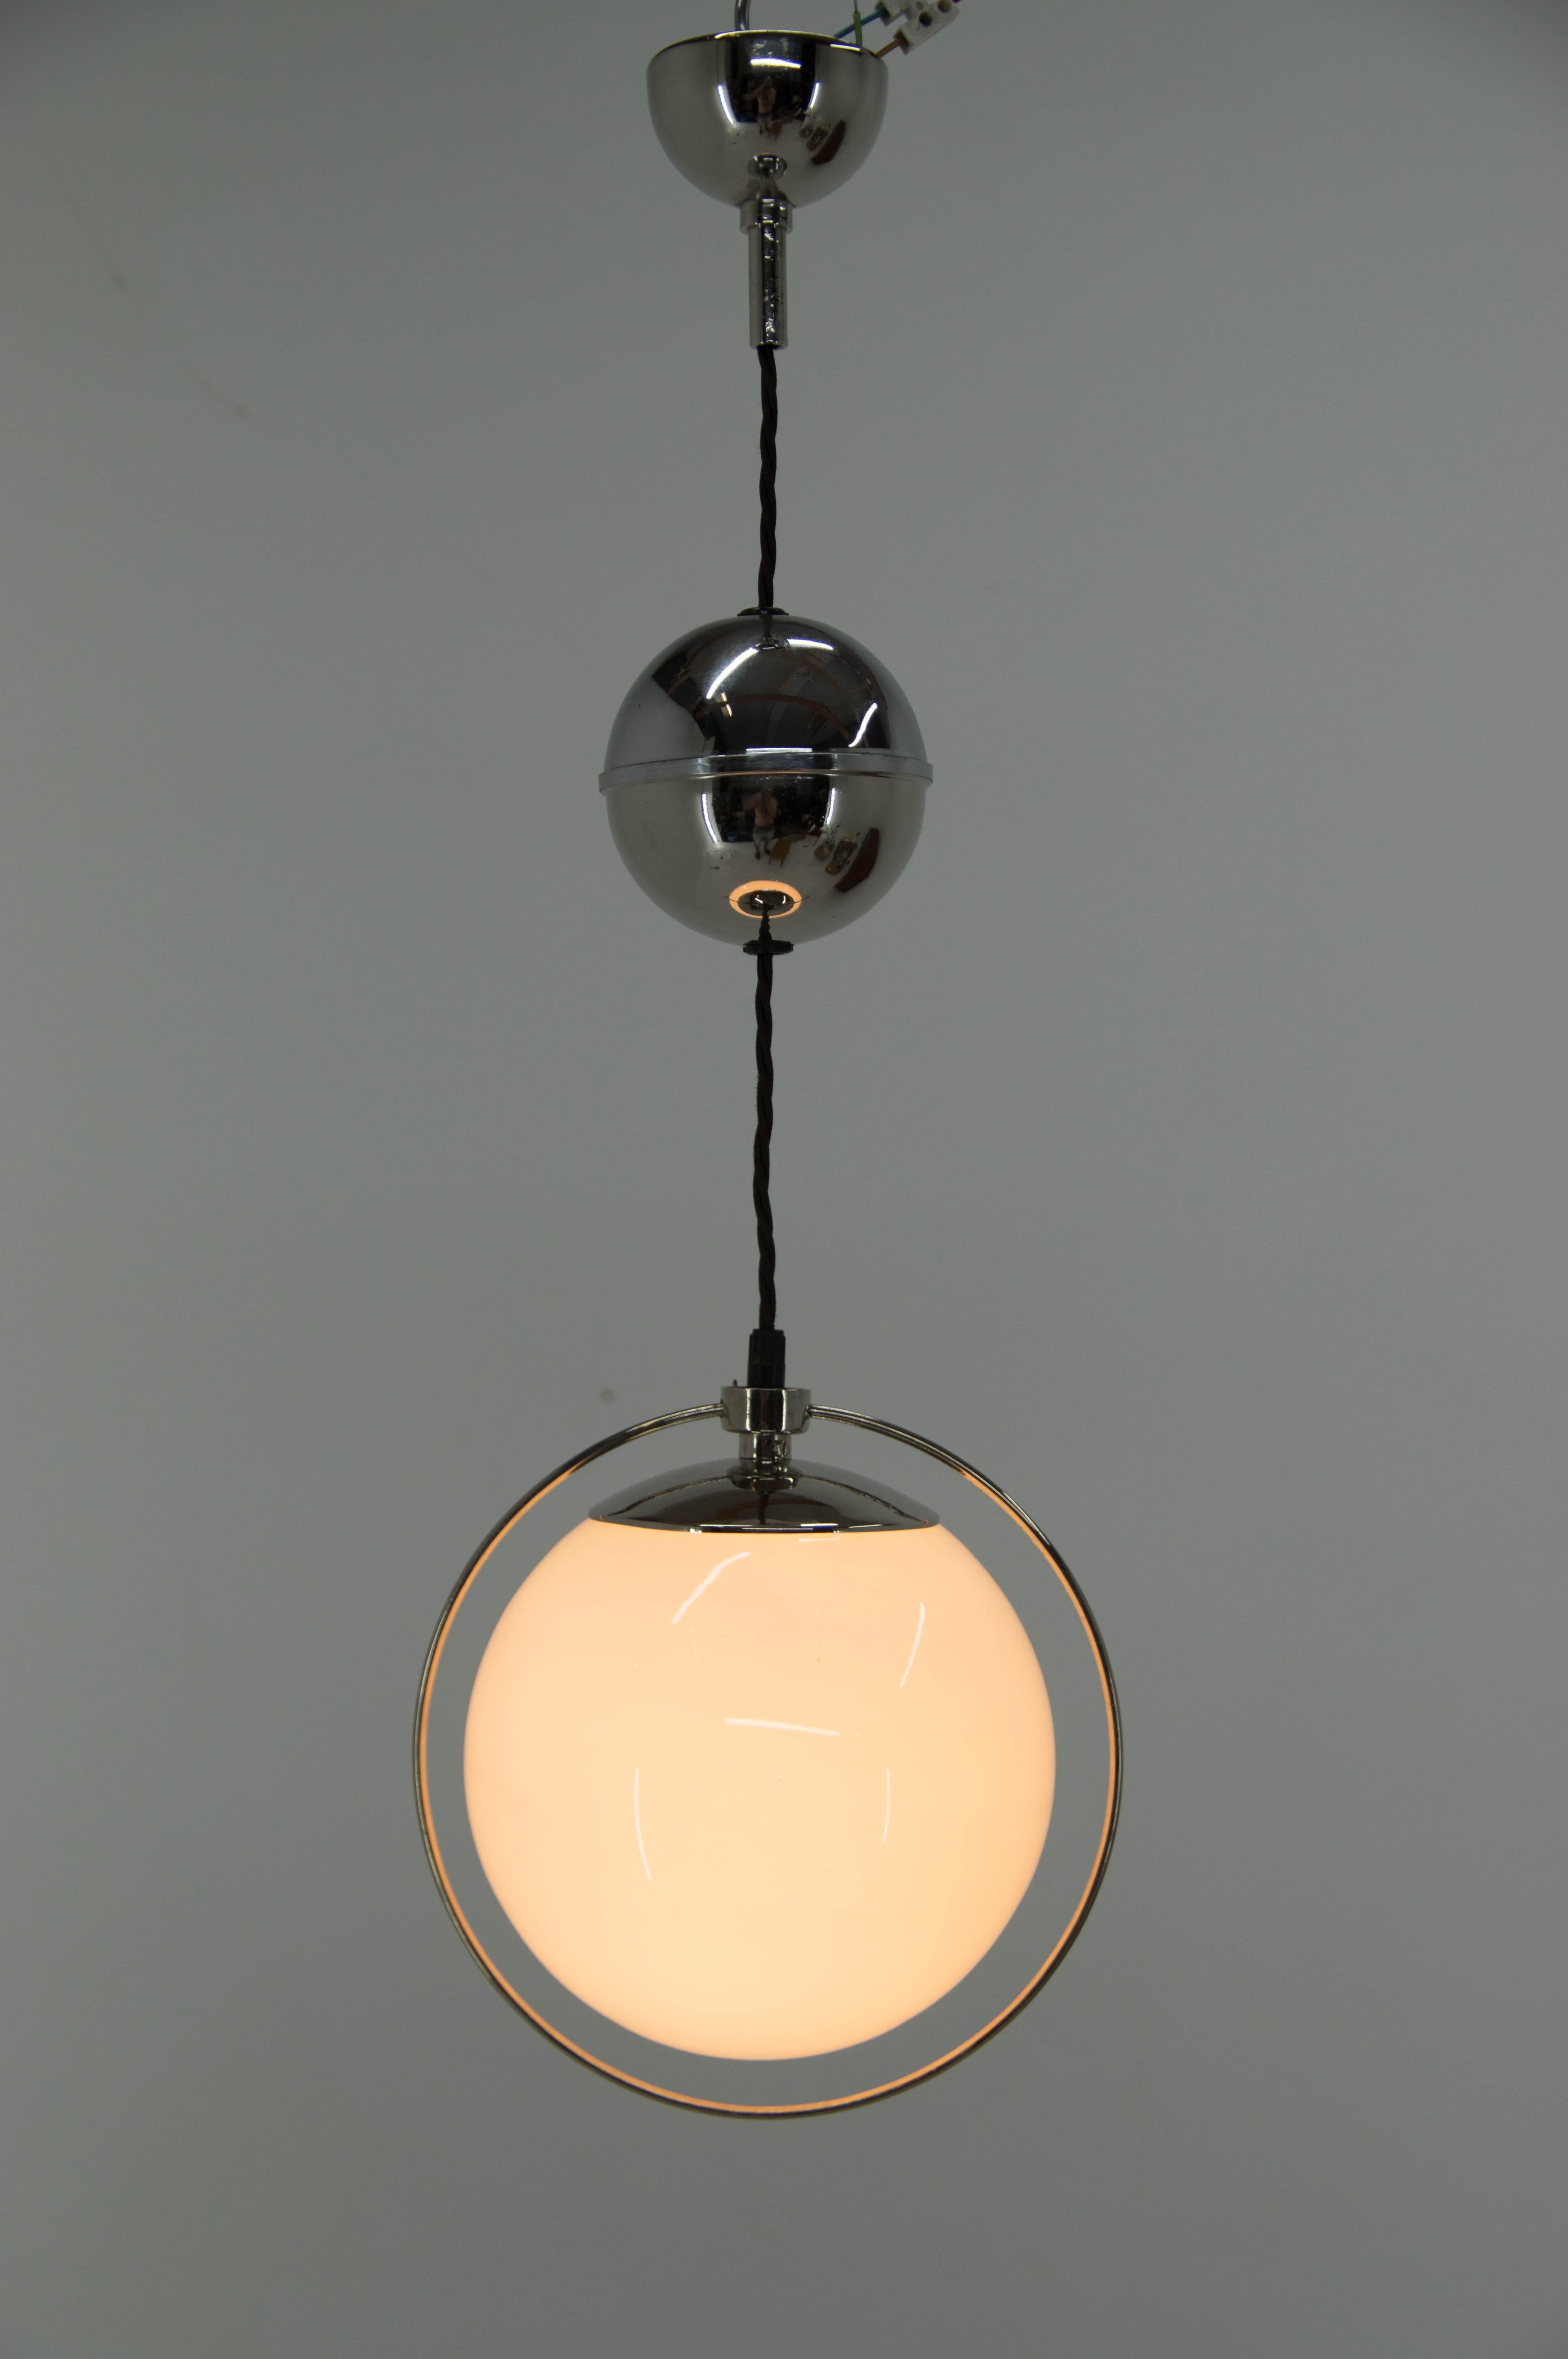 Restored, rewired, polished
max height - 110cm, min height - 68cm
Diameter of globe - 20cm
1x60W, E25-E27 bulb
US wiring compatible.